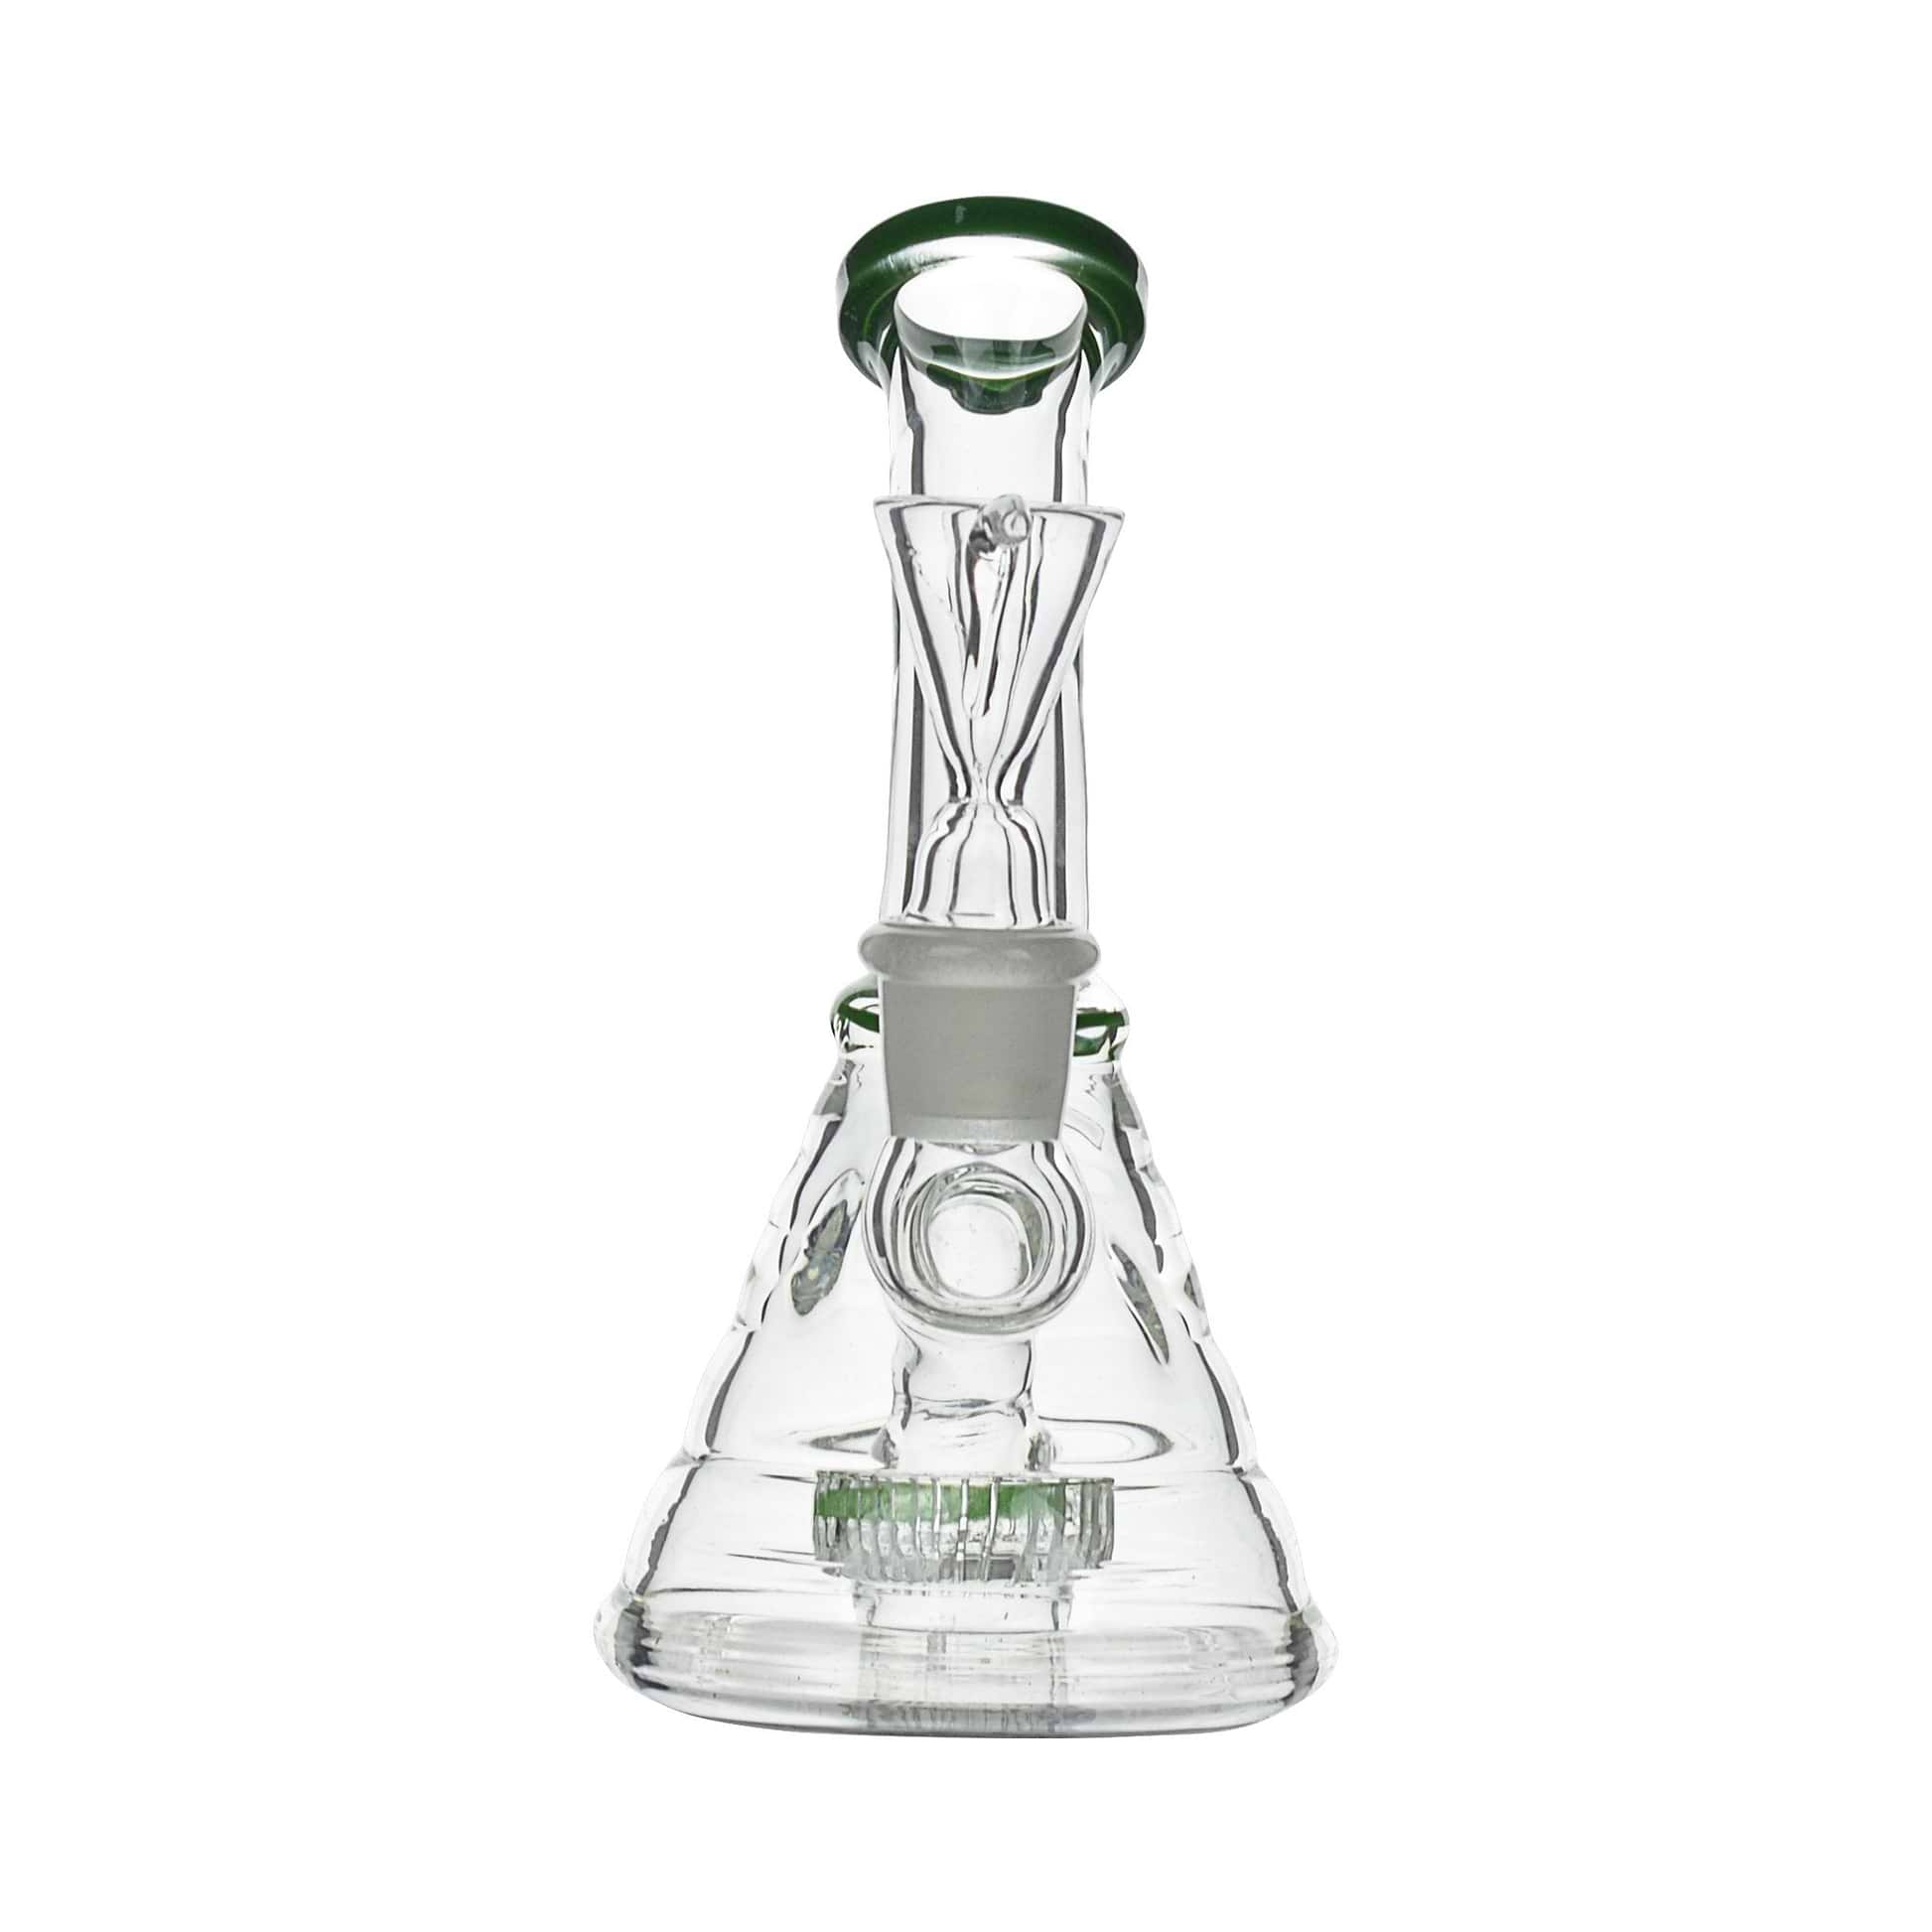 6-inch glass bong smoking device with angled mouthpiece cone-shaped bowl curved perc downstem Green Goblin-inspired